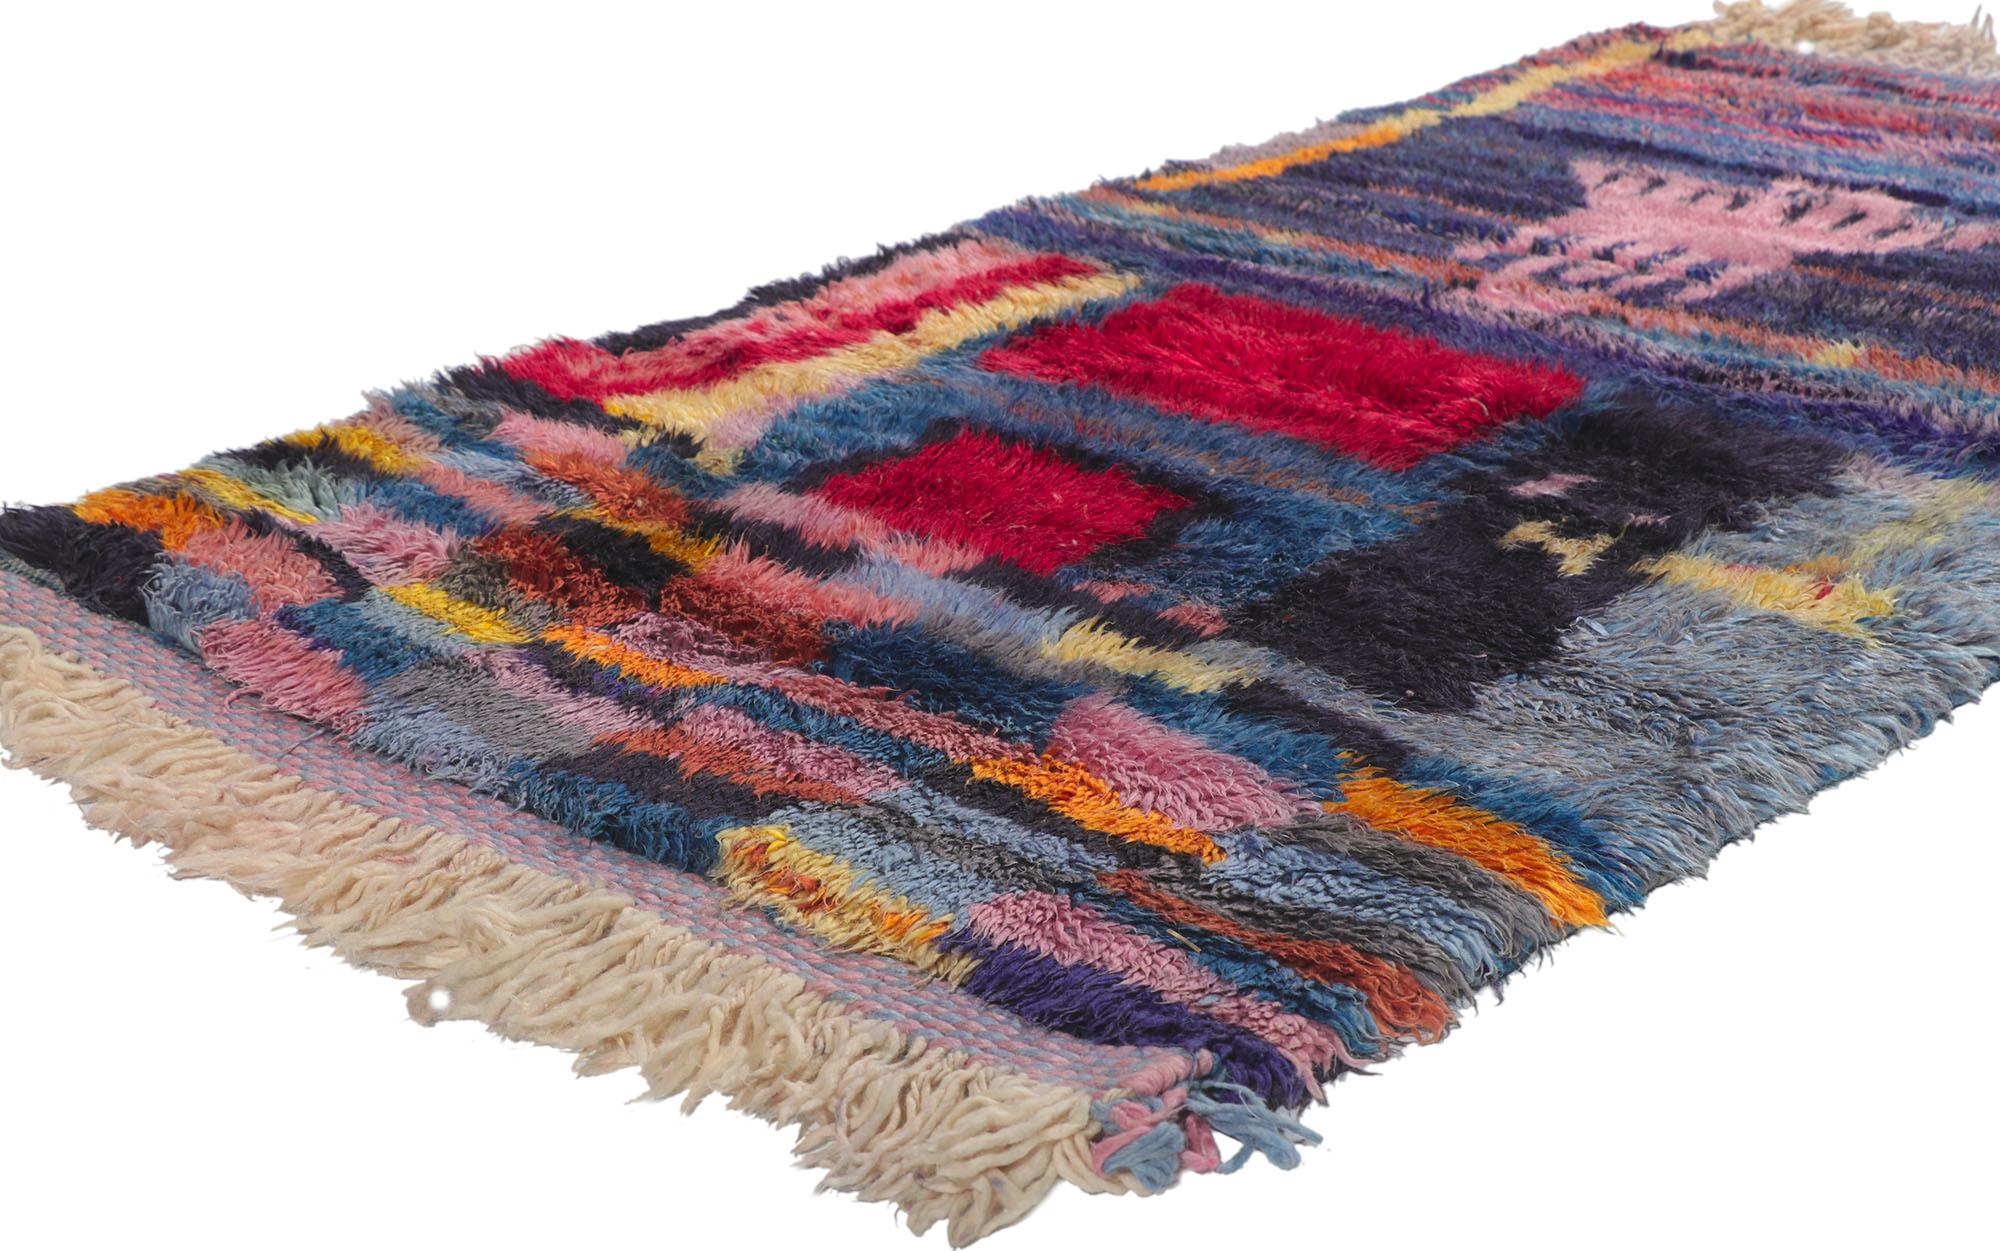 21114 Colorful Moroccan Beni Ourain Rug, 02'11 x 05'05. Colorful Beni Ourain rugs, originating from the Beni Ourain tribes of the Atlas Mountains in Morocco, offer a vibrant departure from traditional designs. While traditional Beni Ourain rugs are